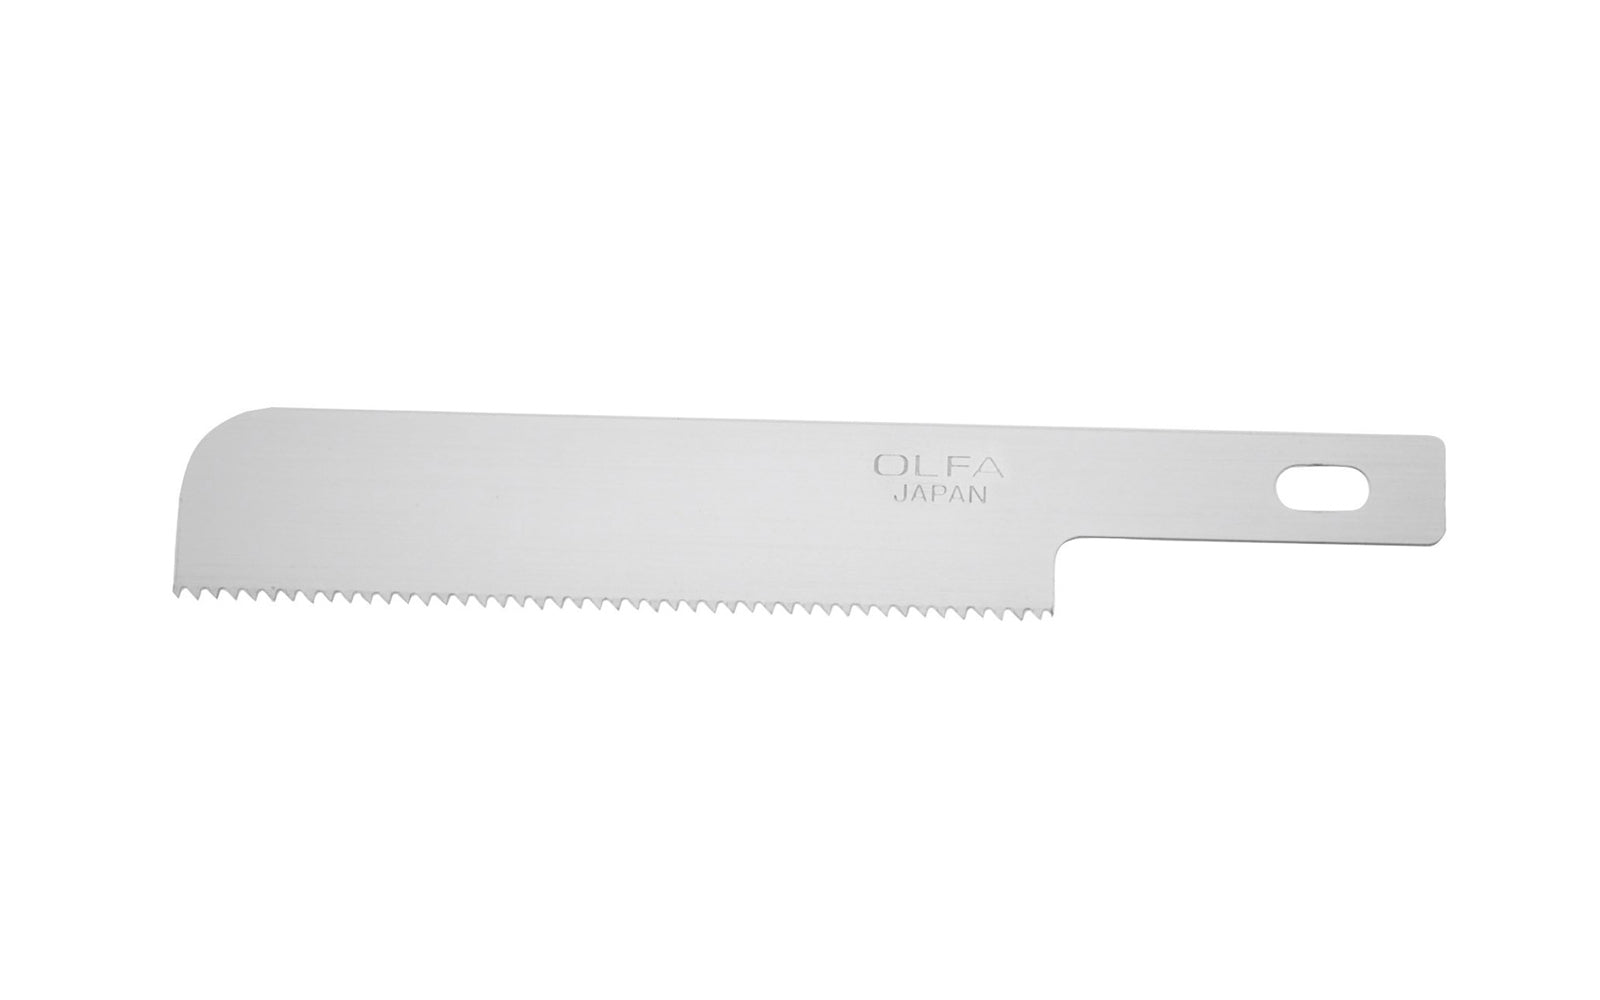 These Olfa KB4-WS/3 Precision Saw Serrated Art Blades are good for cutting plastic or wood for dioramas or mixed media art projects. Tackle balsa & basswood modelmaking with this Serrated Olfa Blade.  Perfect for model making, crafts & hobby, & more. Designed for Olfa AK-4 knife. 3 Pack. 091511501087. Made in Japan